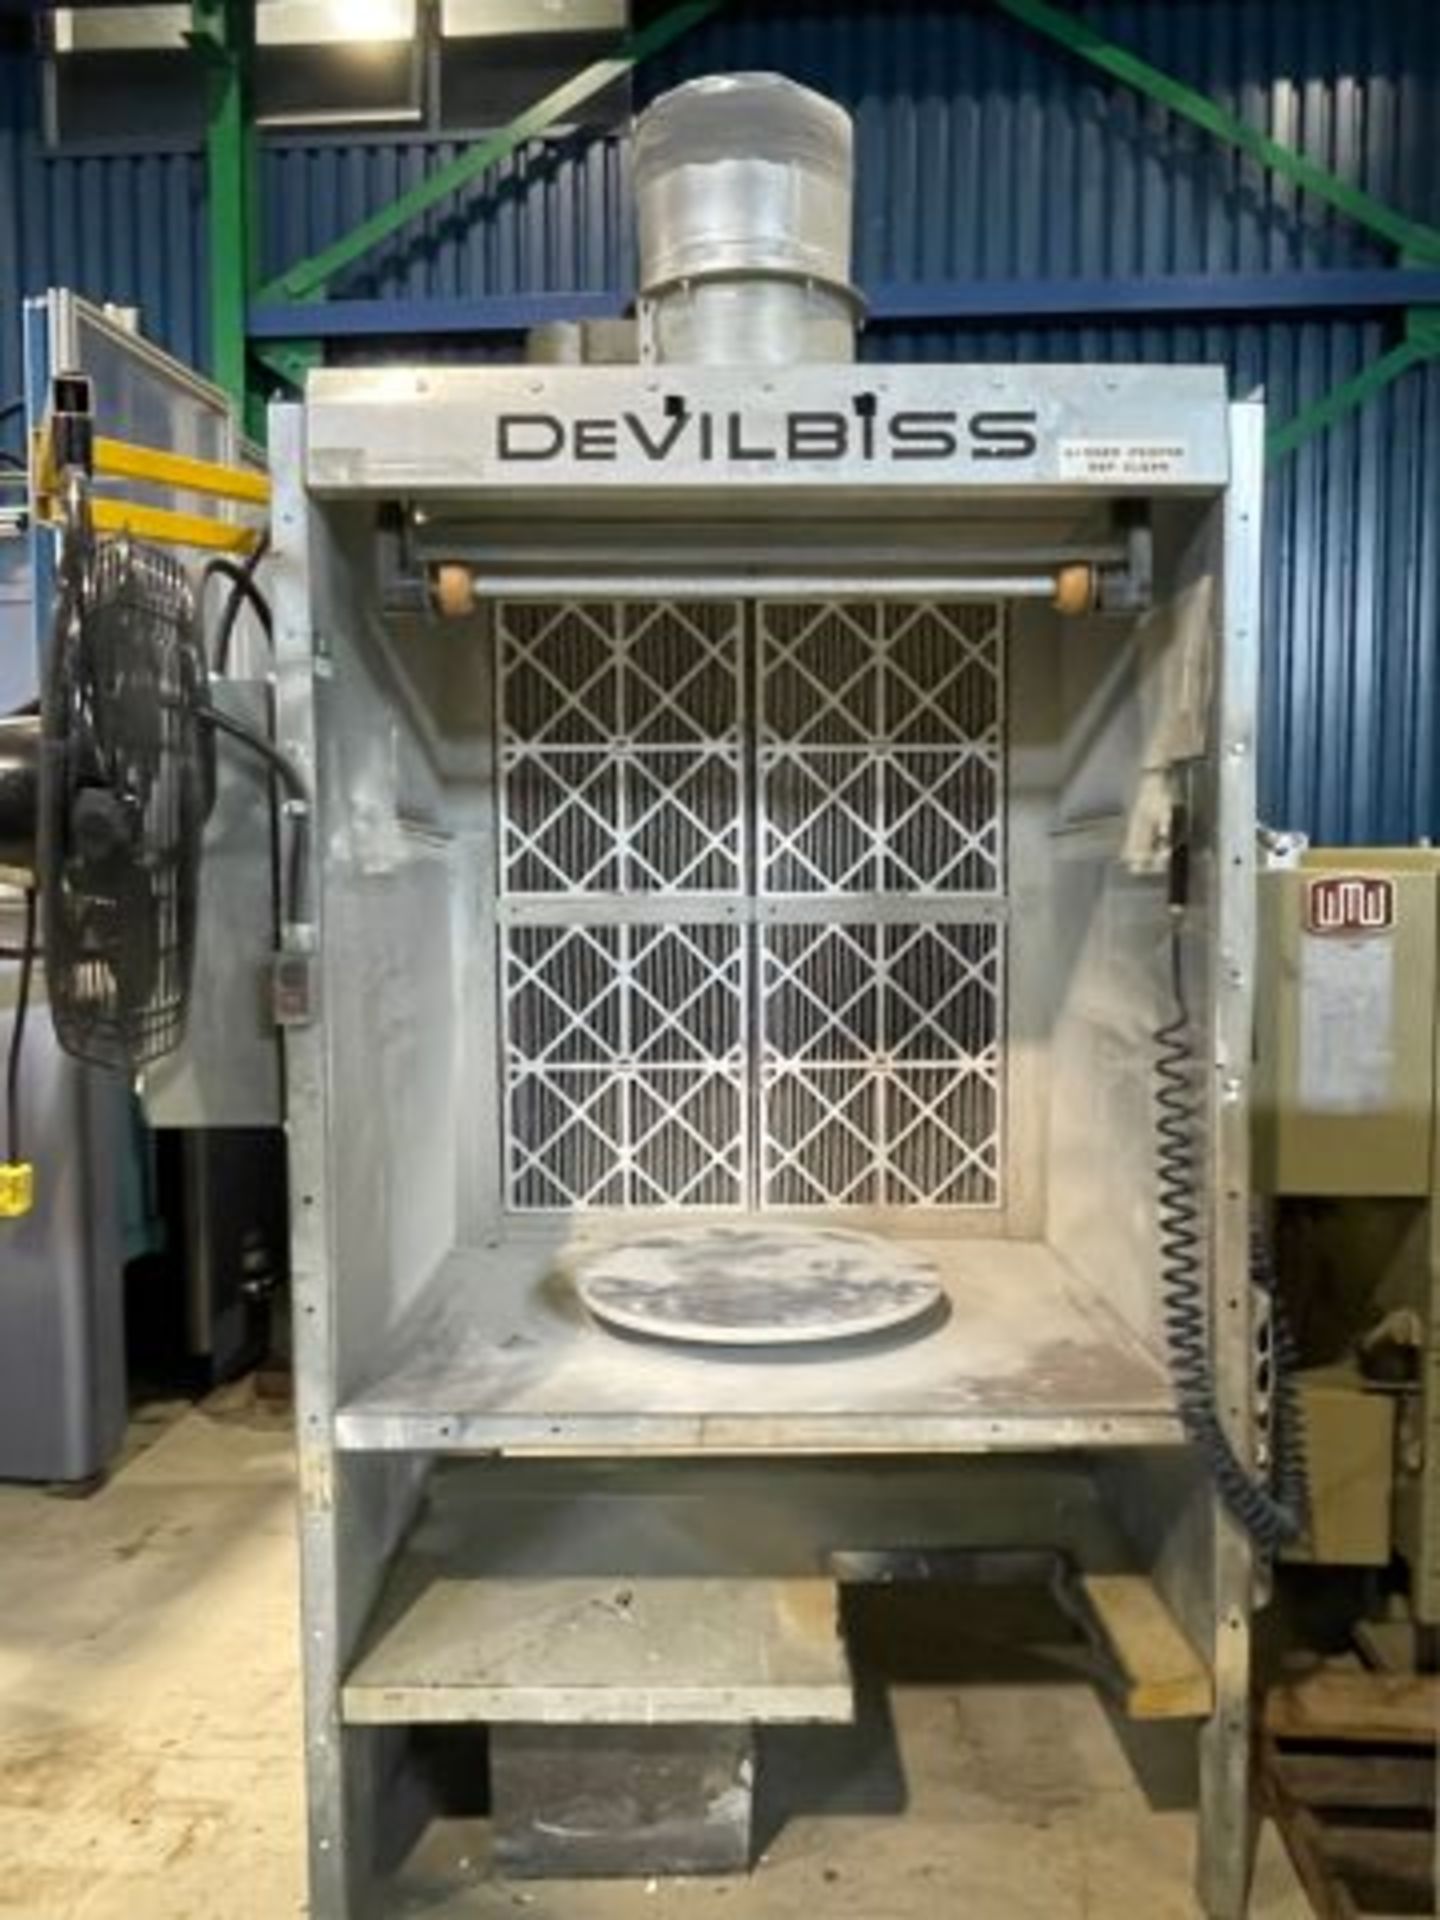 DEVILBISS DEBURRING BOOTH 36" X 47" X 44" WORK AREA, MOD: QNST5226, TURNTABLE, 575 VOLTS 3 PHASES - Image 2 of 3